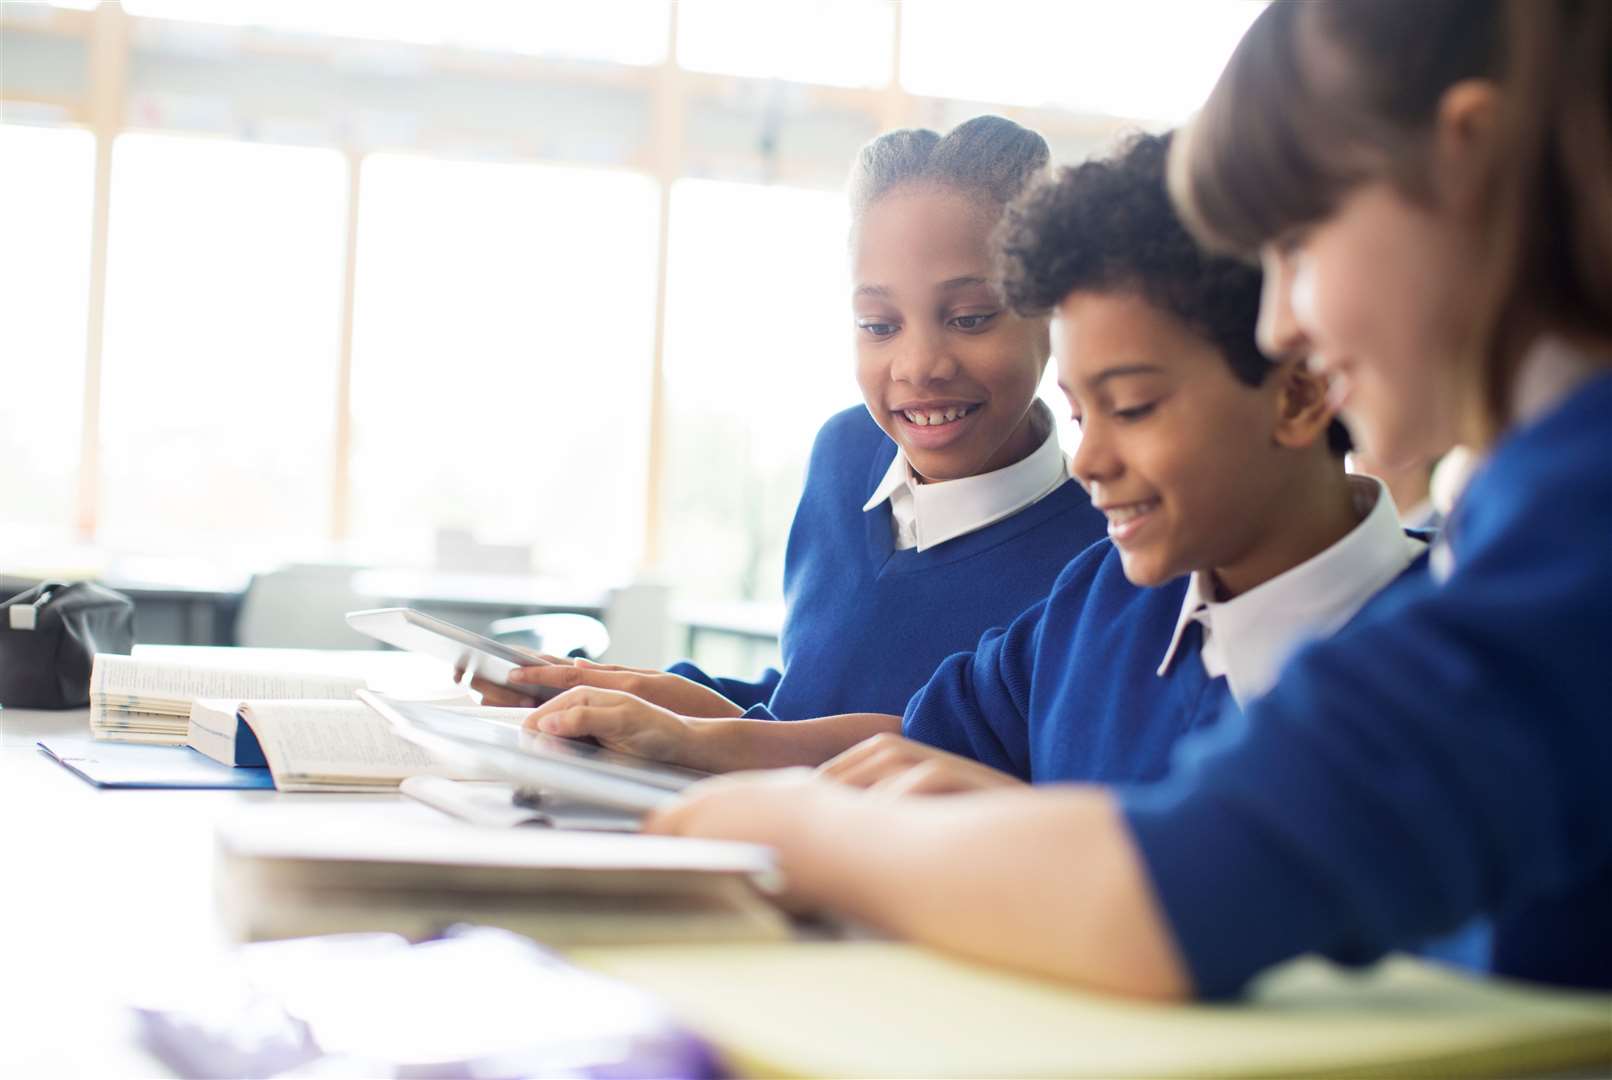 Pupils have returned to classrooms this week. Image: iStock.